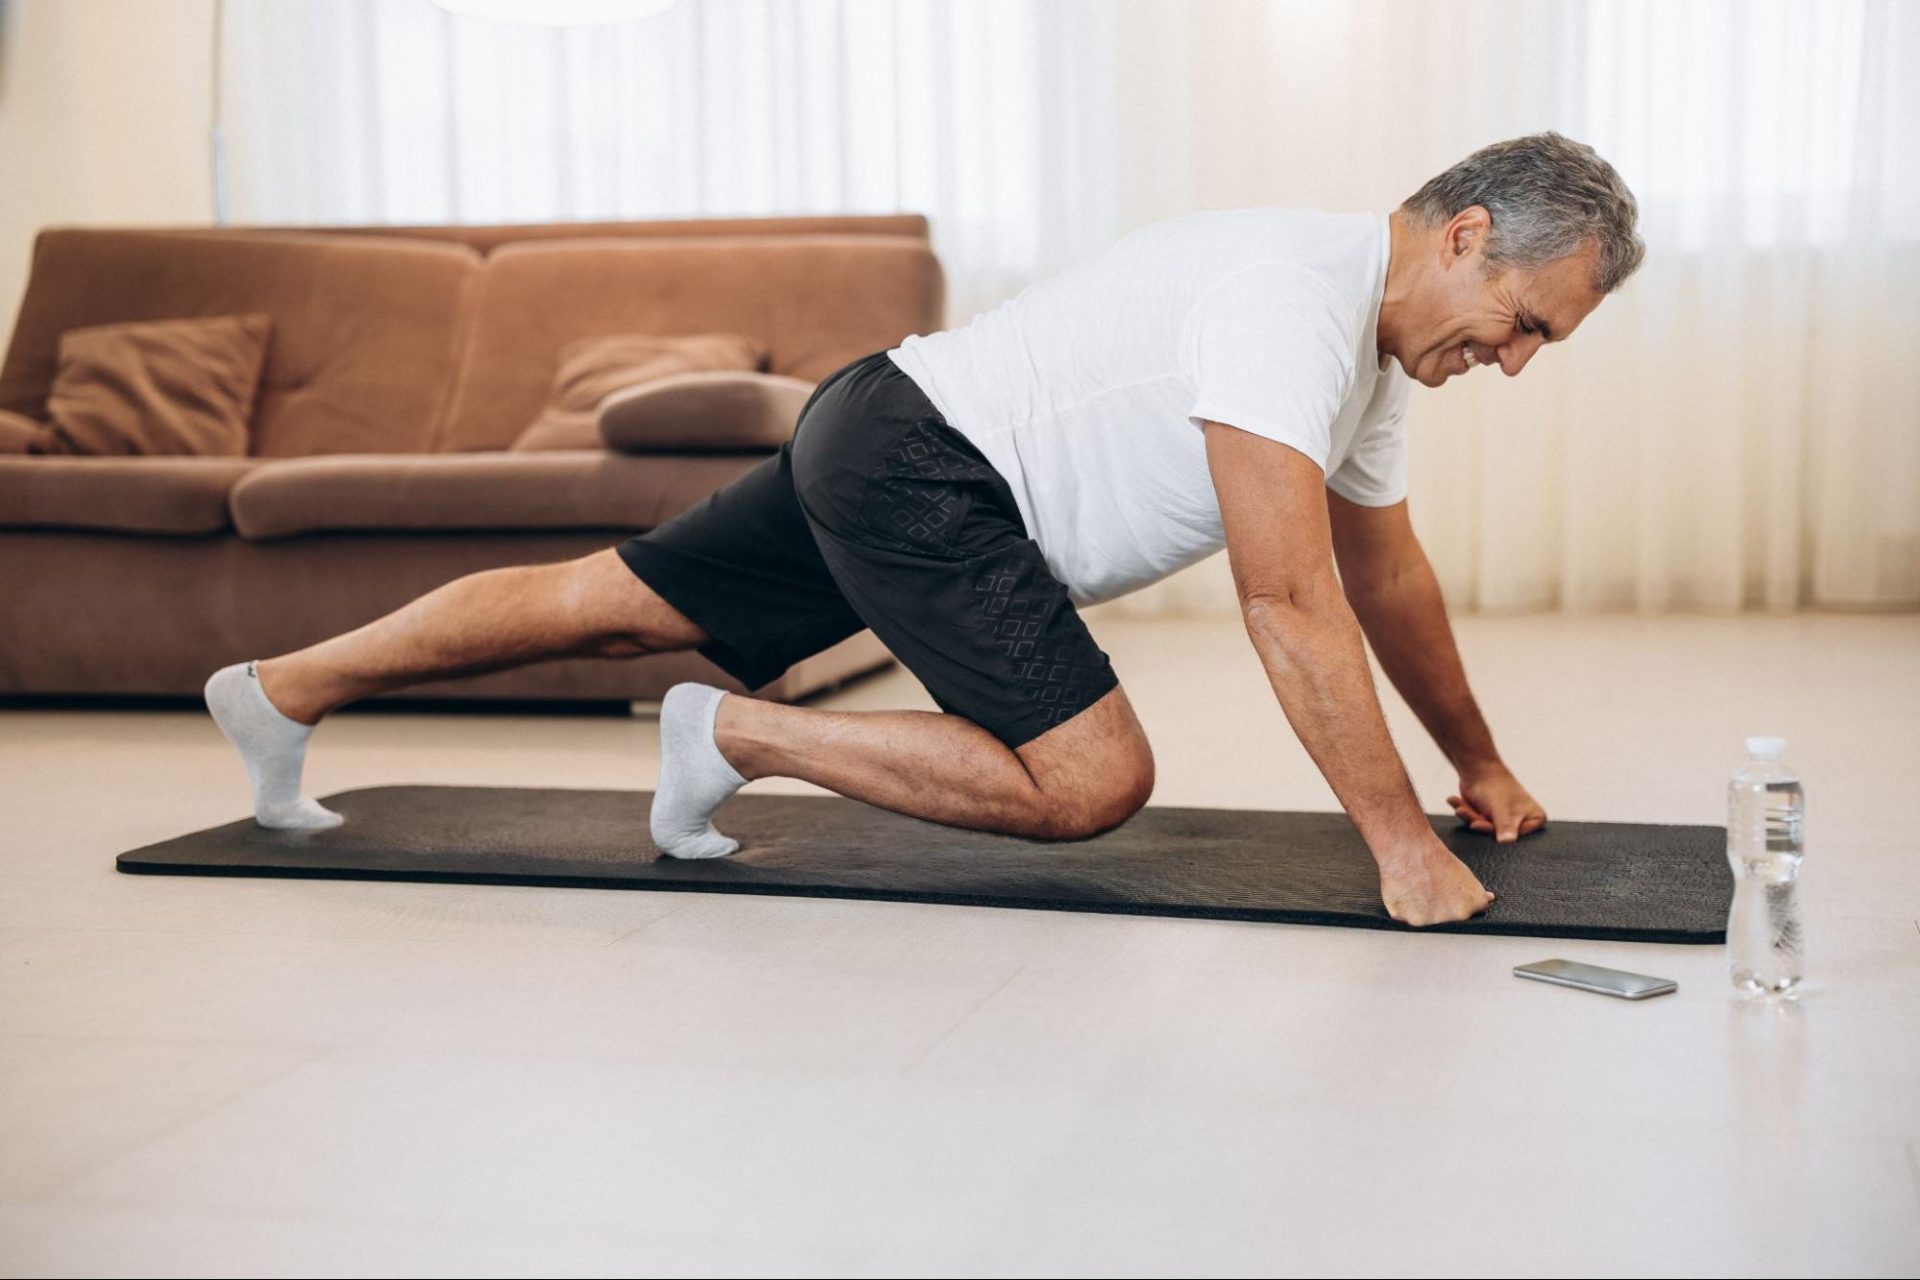 Home, Online Fitness for Heart Health